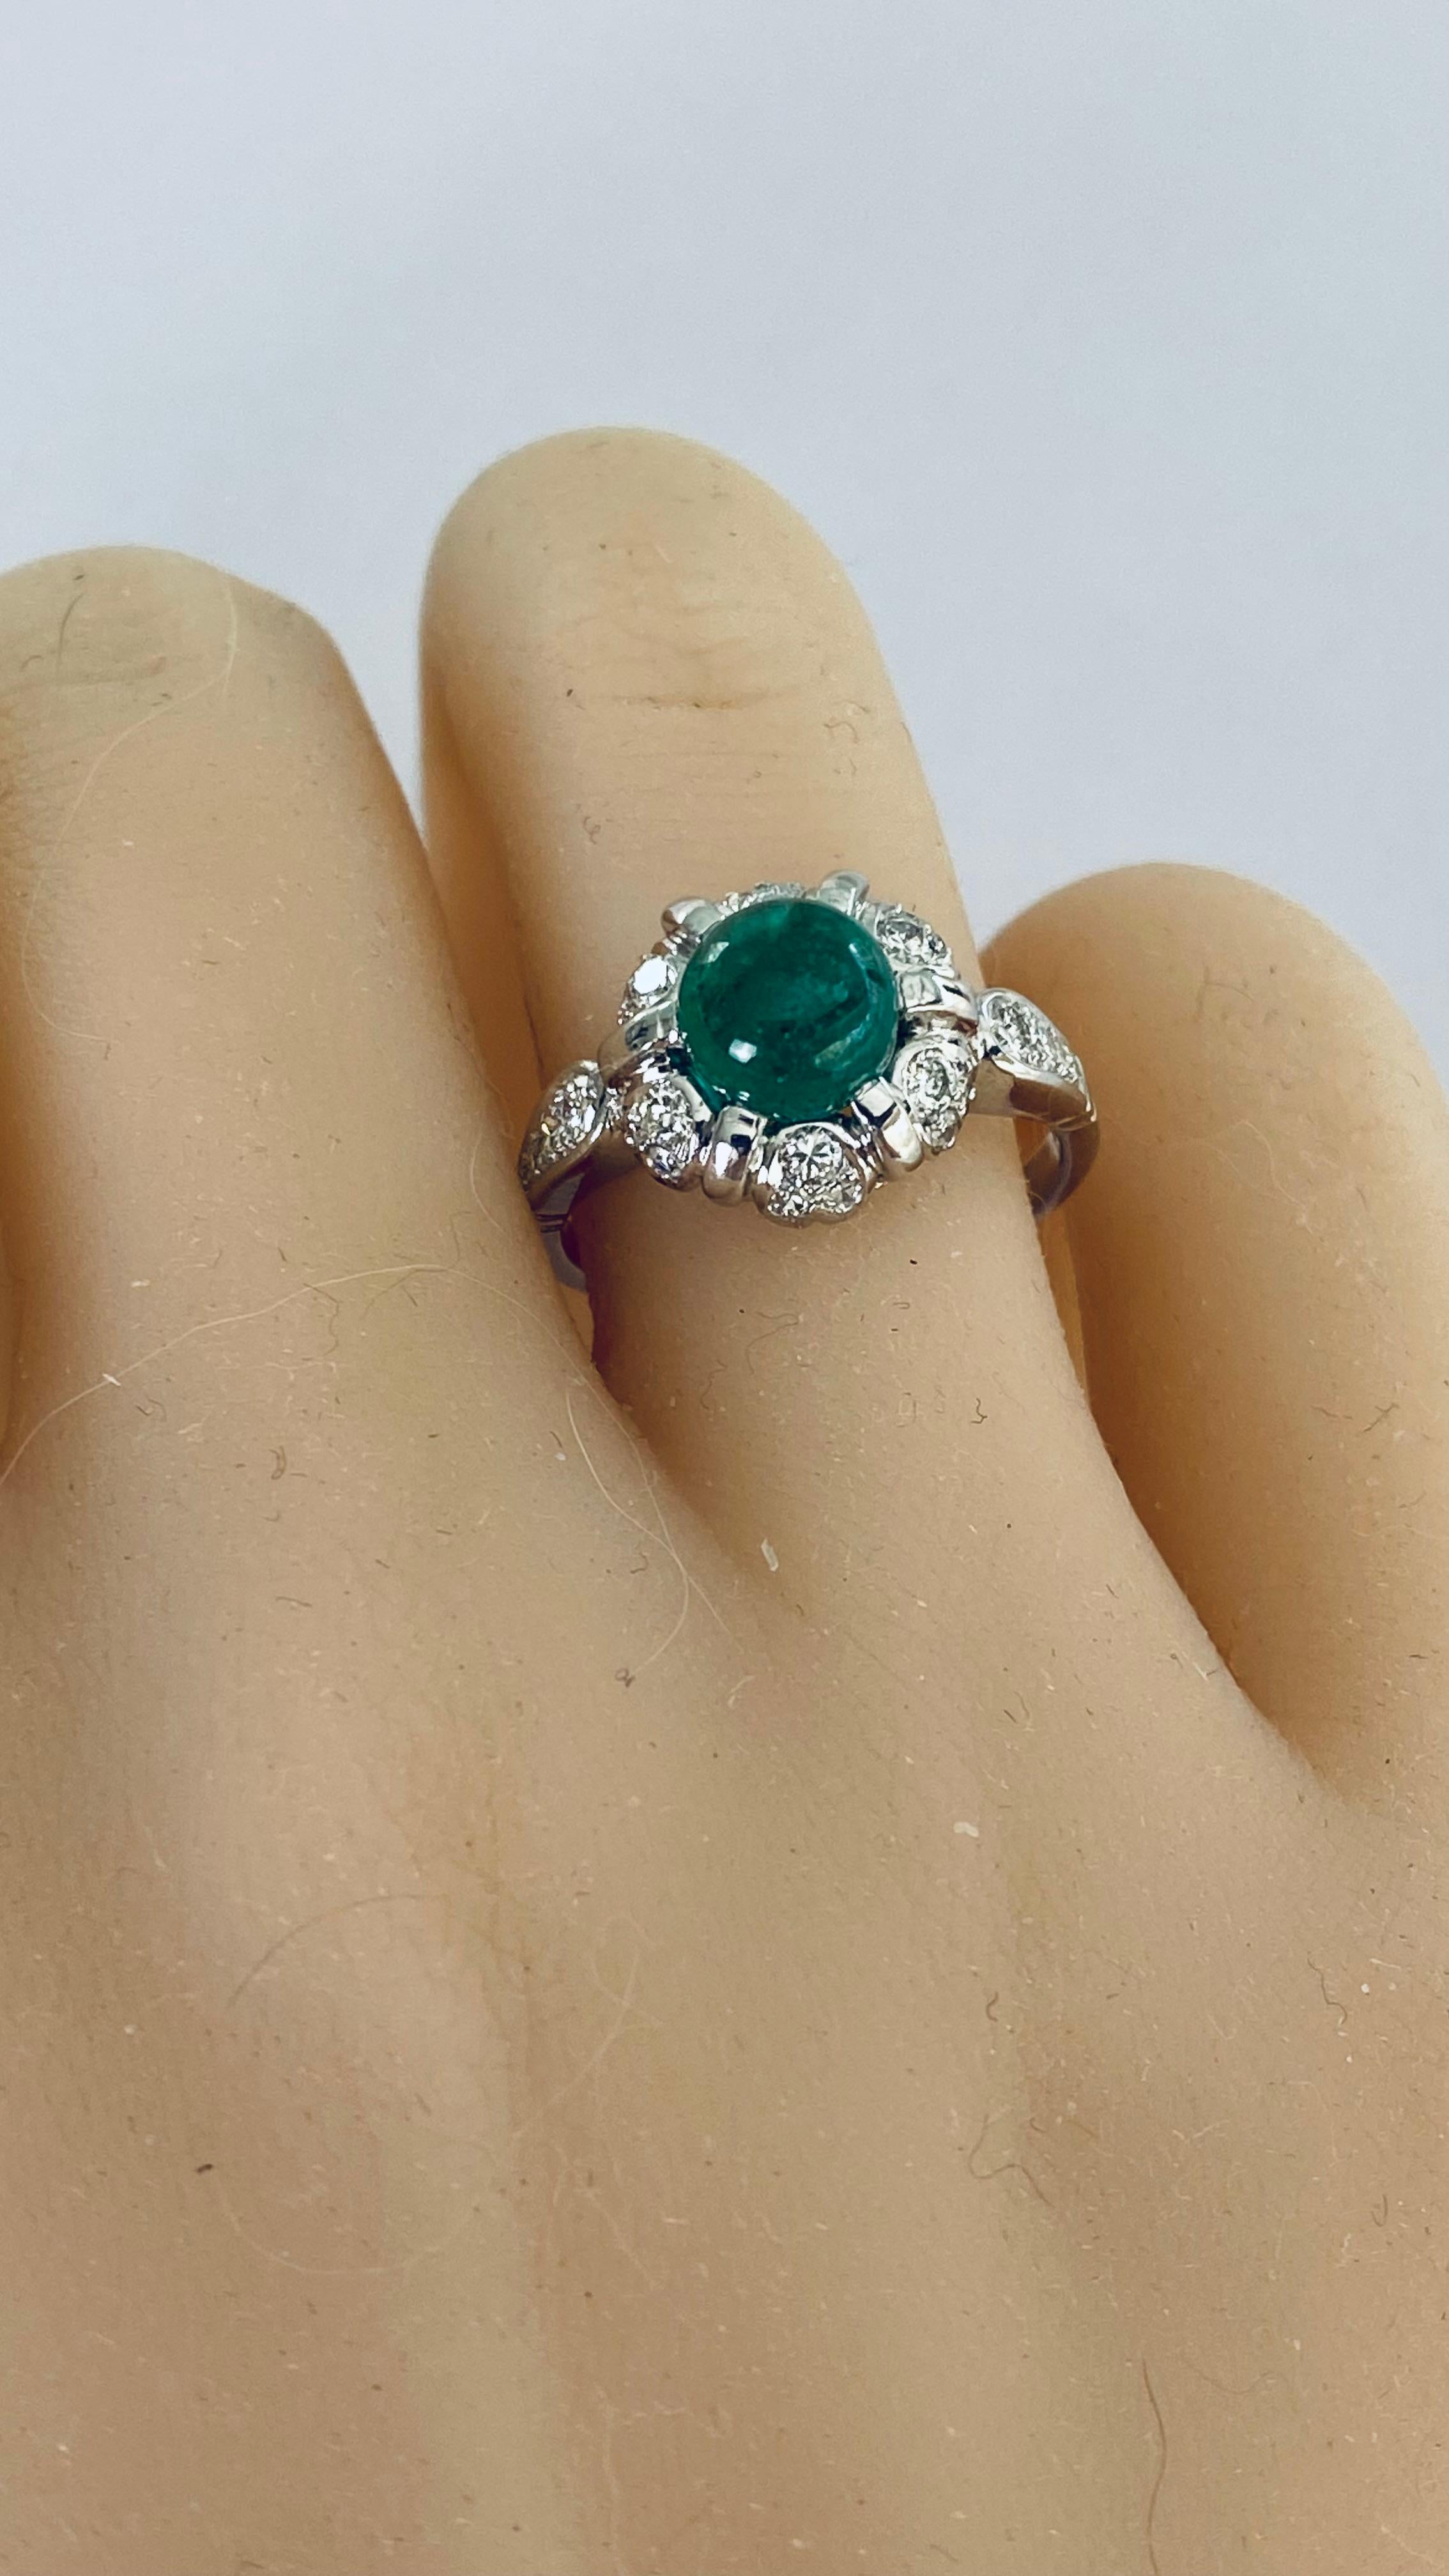 Vintage mid-century engagement ring sounds absolutely stunning.
Design Era: The ring belongs to the mid-century period, suggesting a design aesthetic popularized between the 1930s and 1960s. This era is known for its sleek lines, geometric shapes,